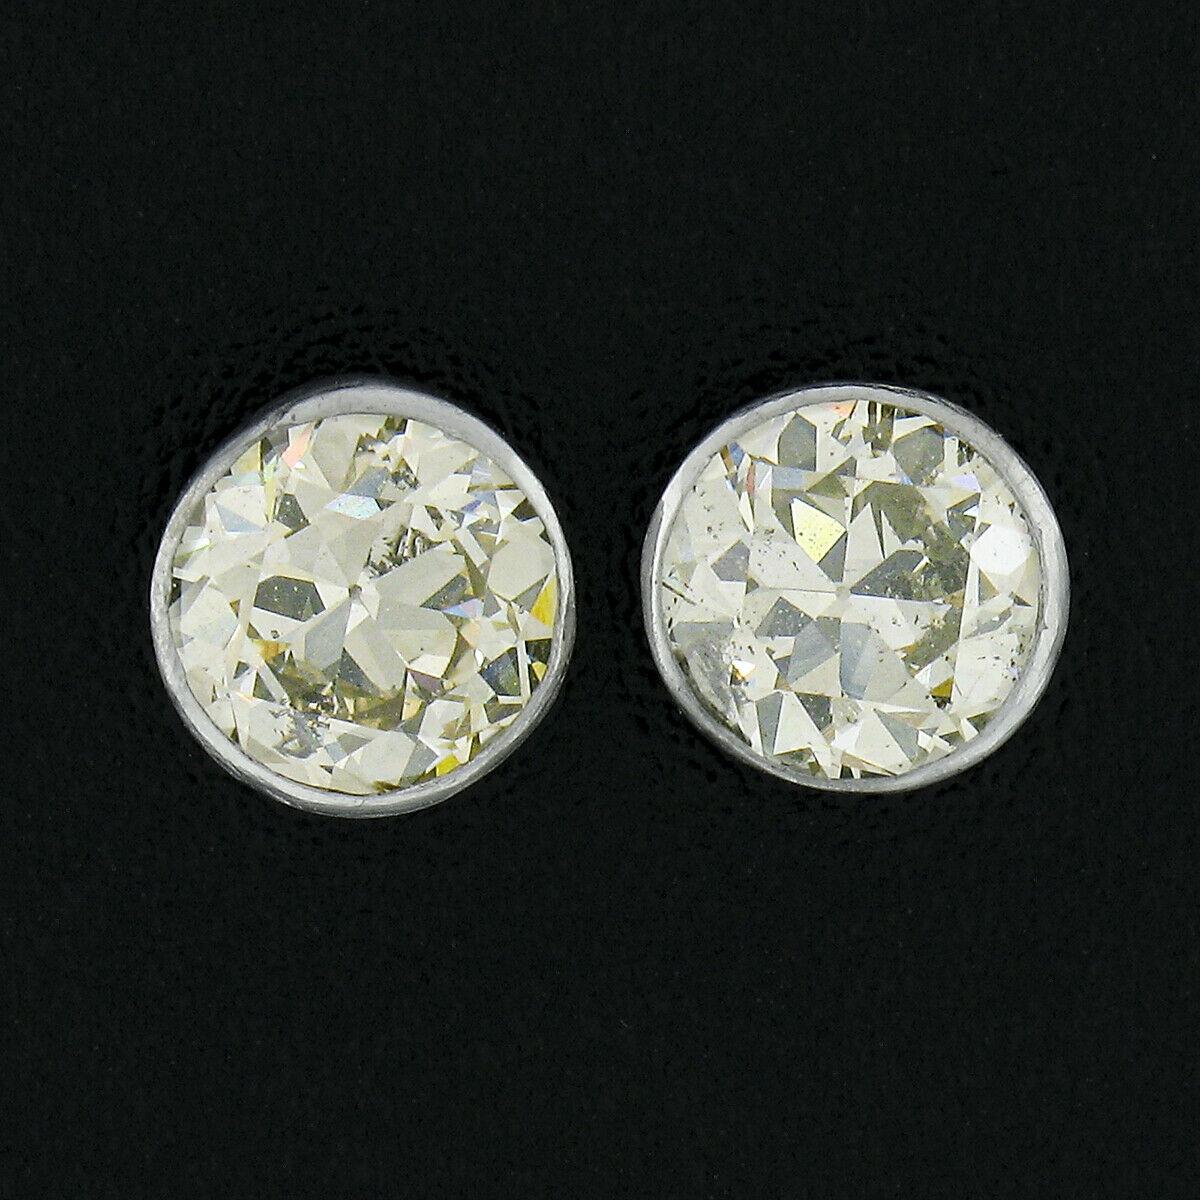 Here we have an outstanding pair of antique diamond stud earrings that were crafted from solid platinum during the art deco period. They feature a pair of genuine, antique, old European cut diamonds that weigh a total of approximately 1.16 carats in